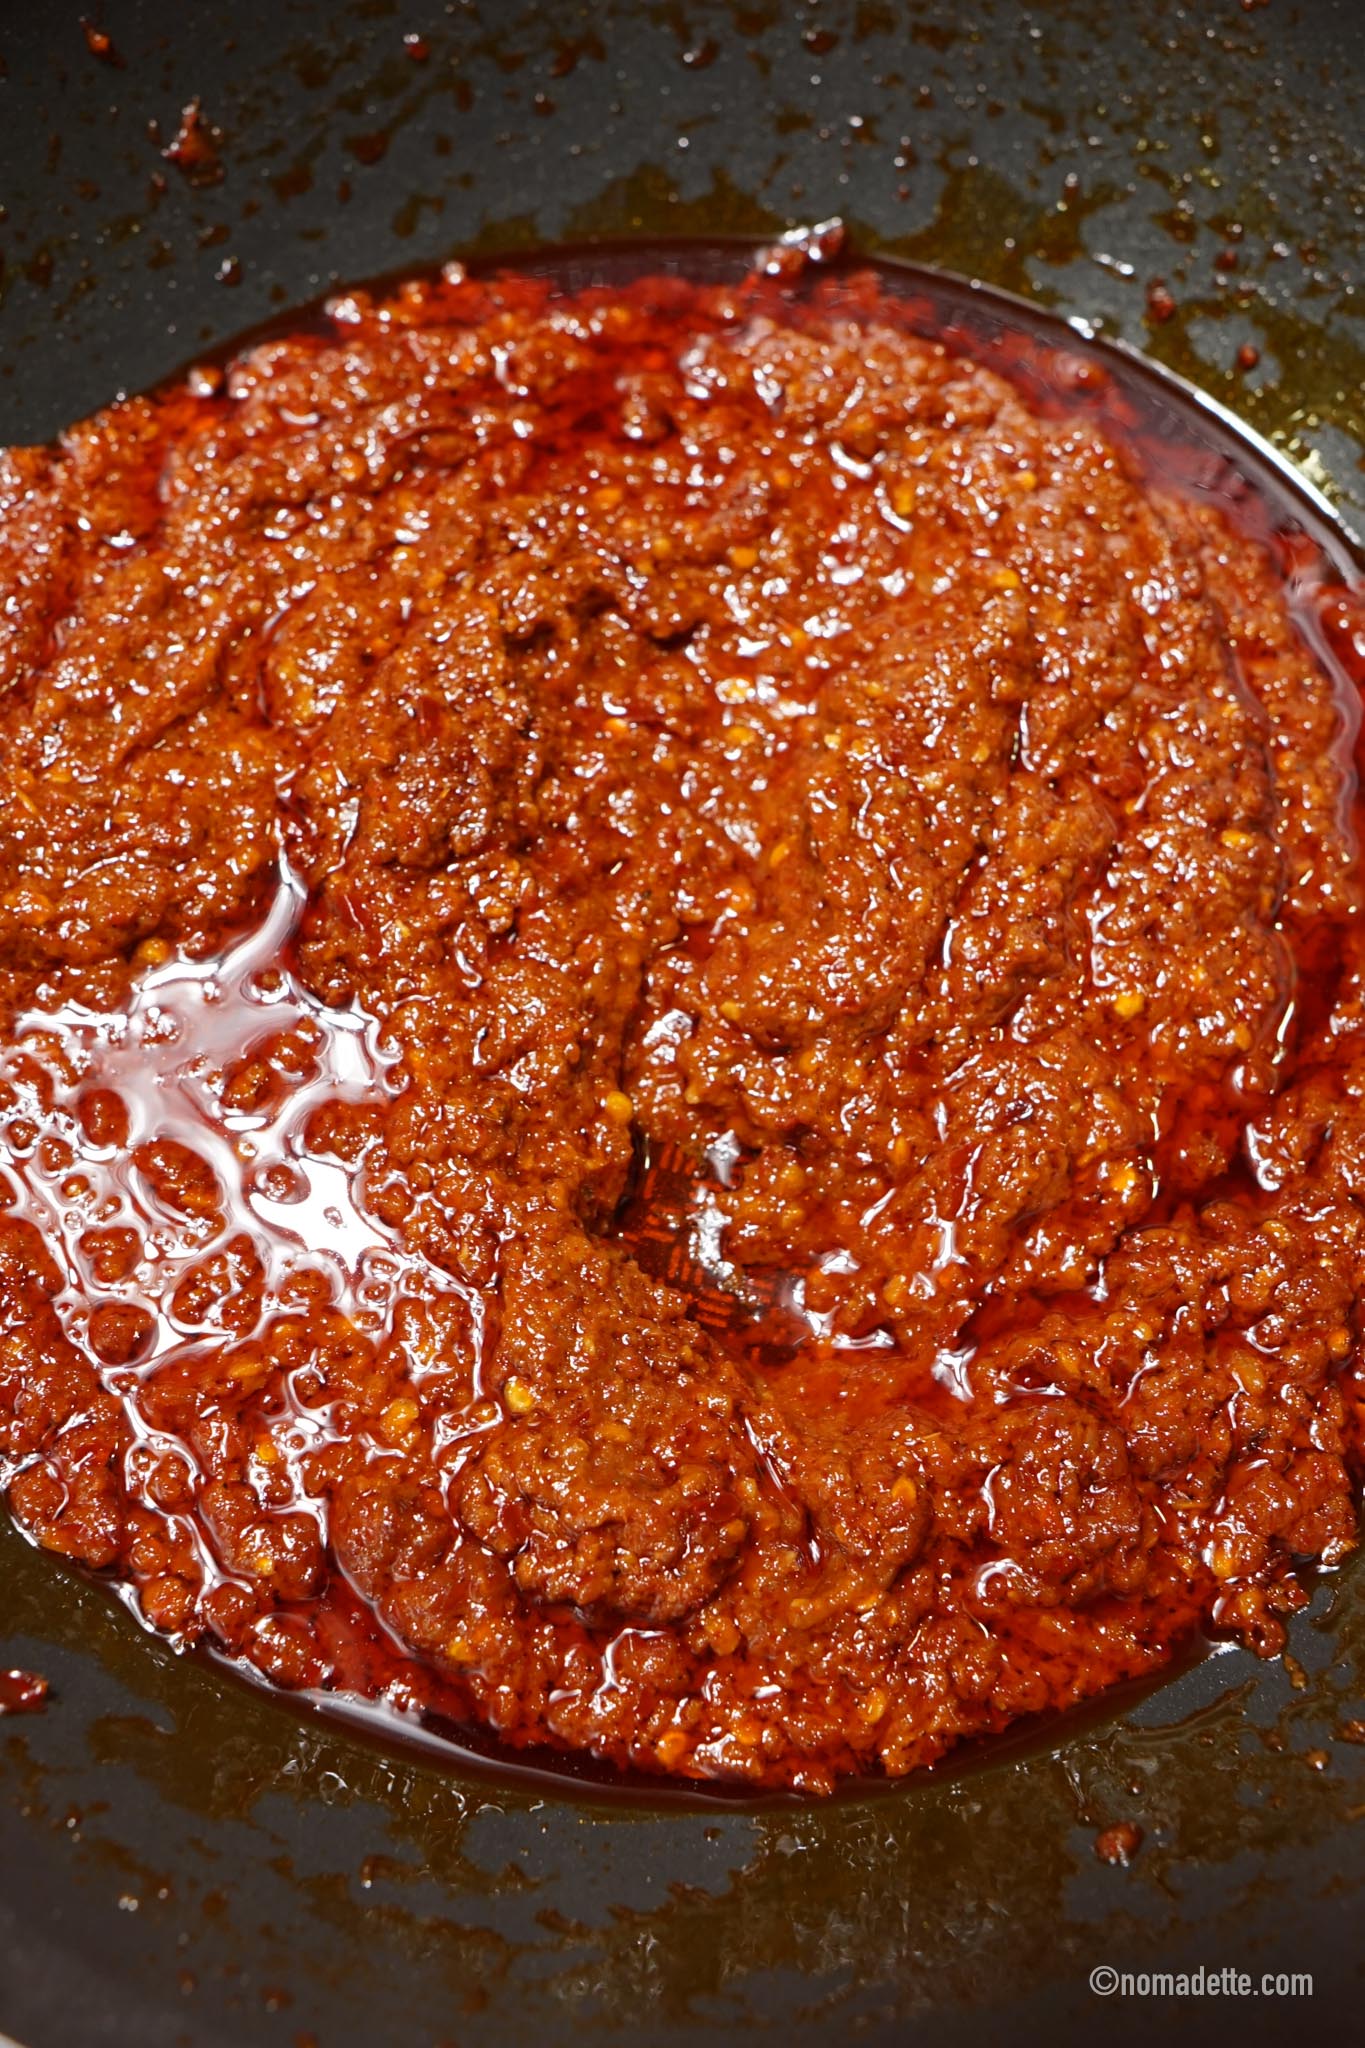 How to Cook Dried Chilli Paste | “Pecah Minyak” or ‘Oil Splitting’